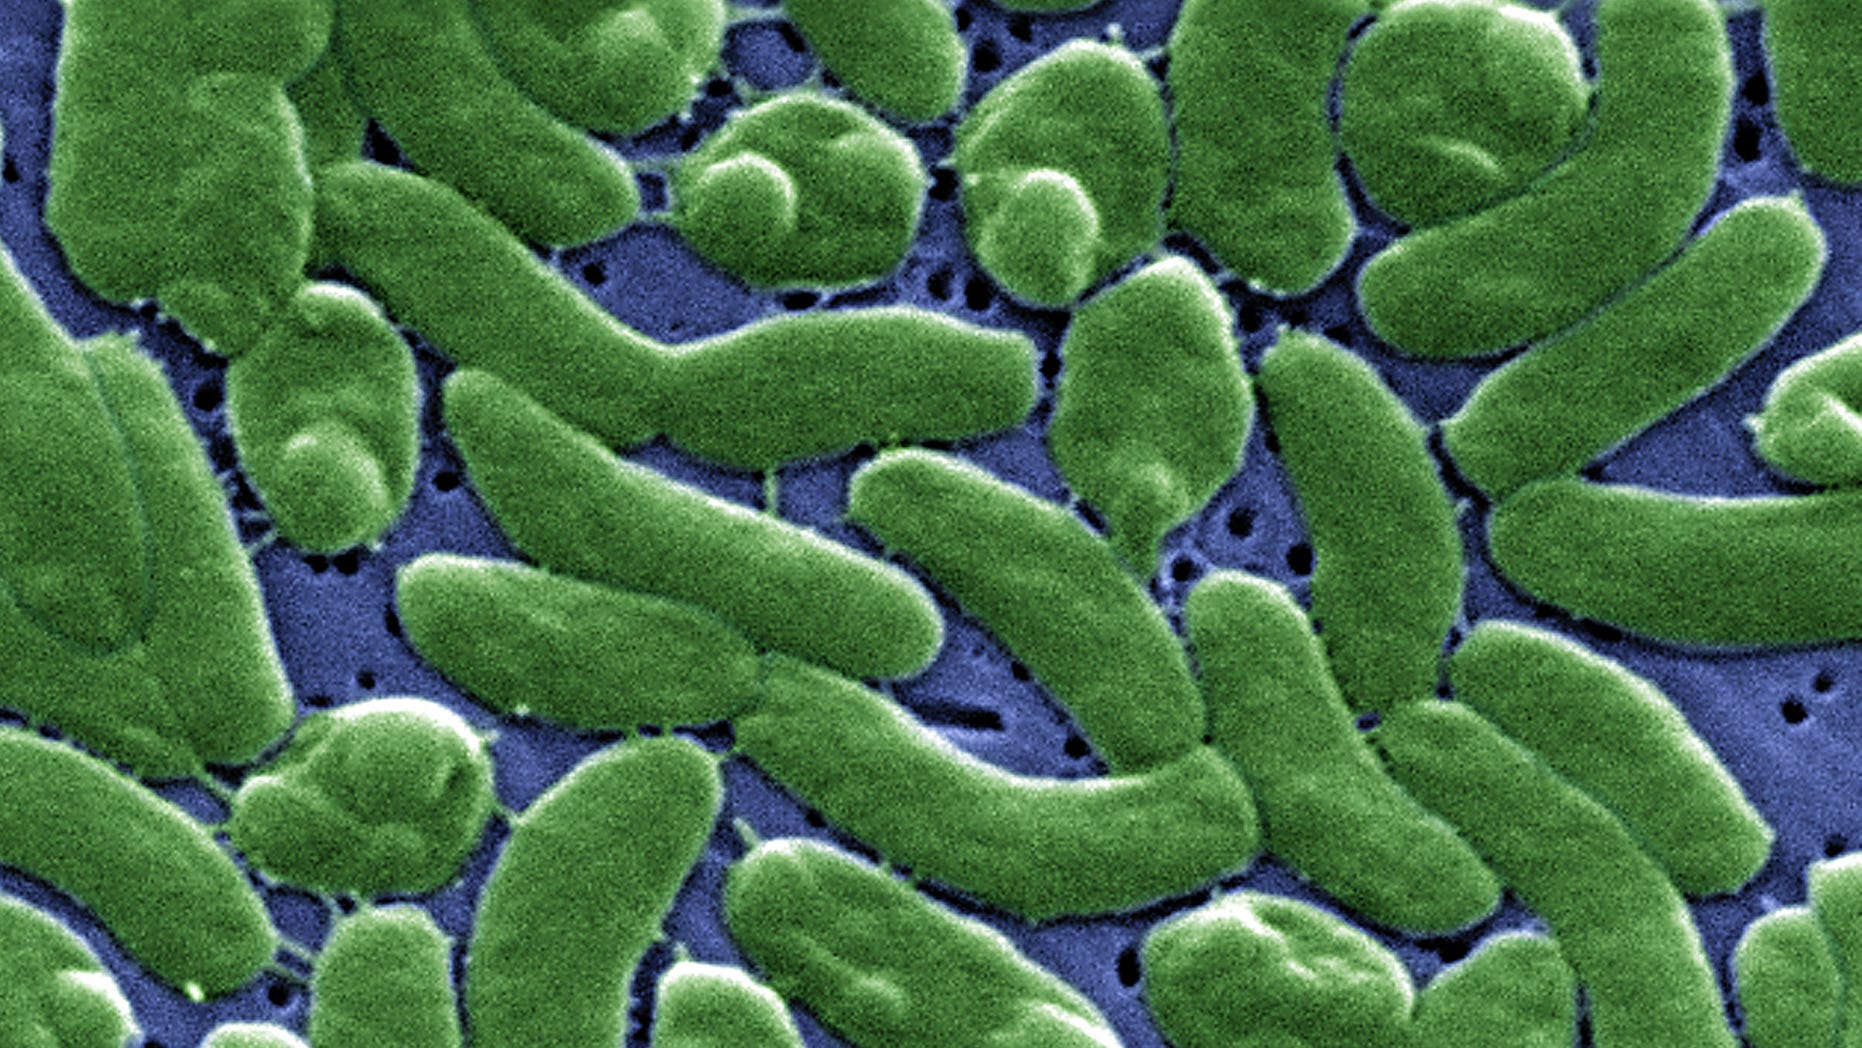 31 in Florida infected by bacteria in salt water Fox News